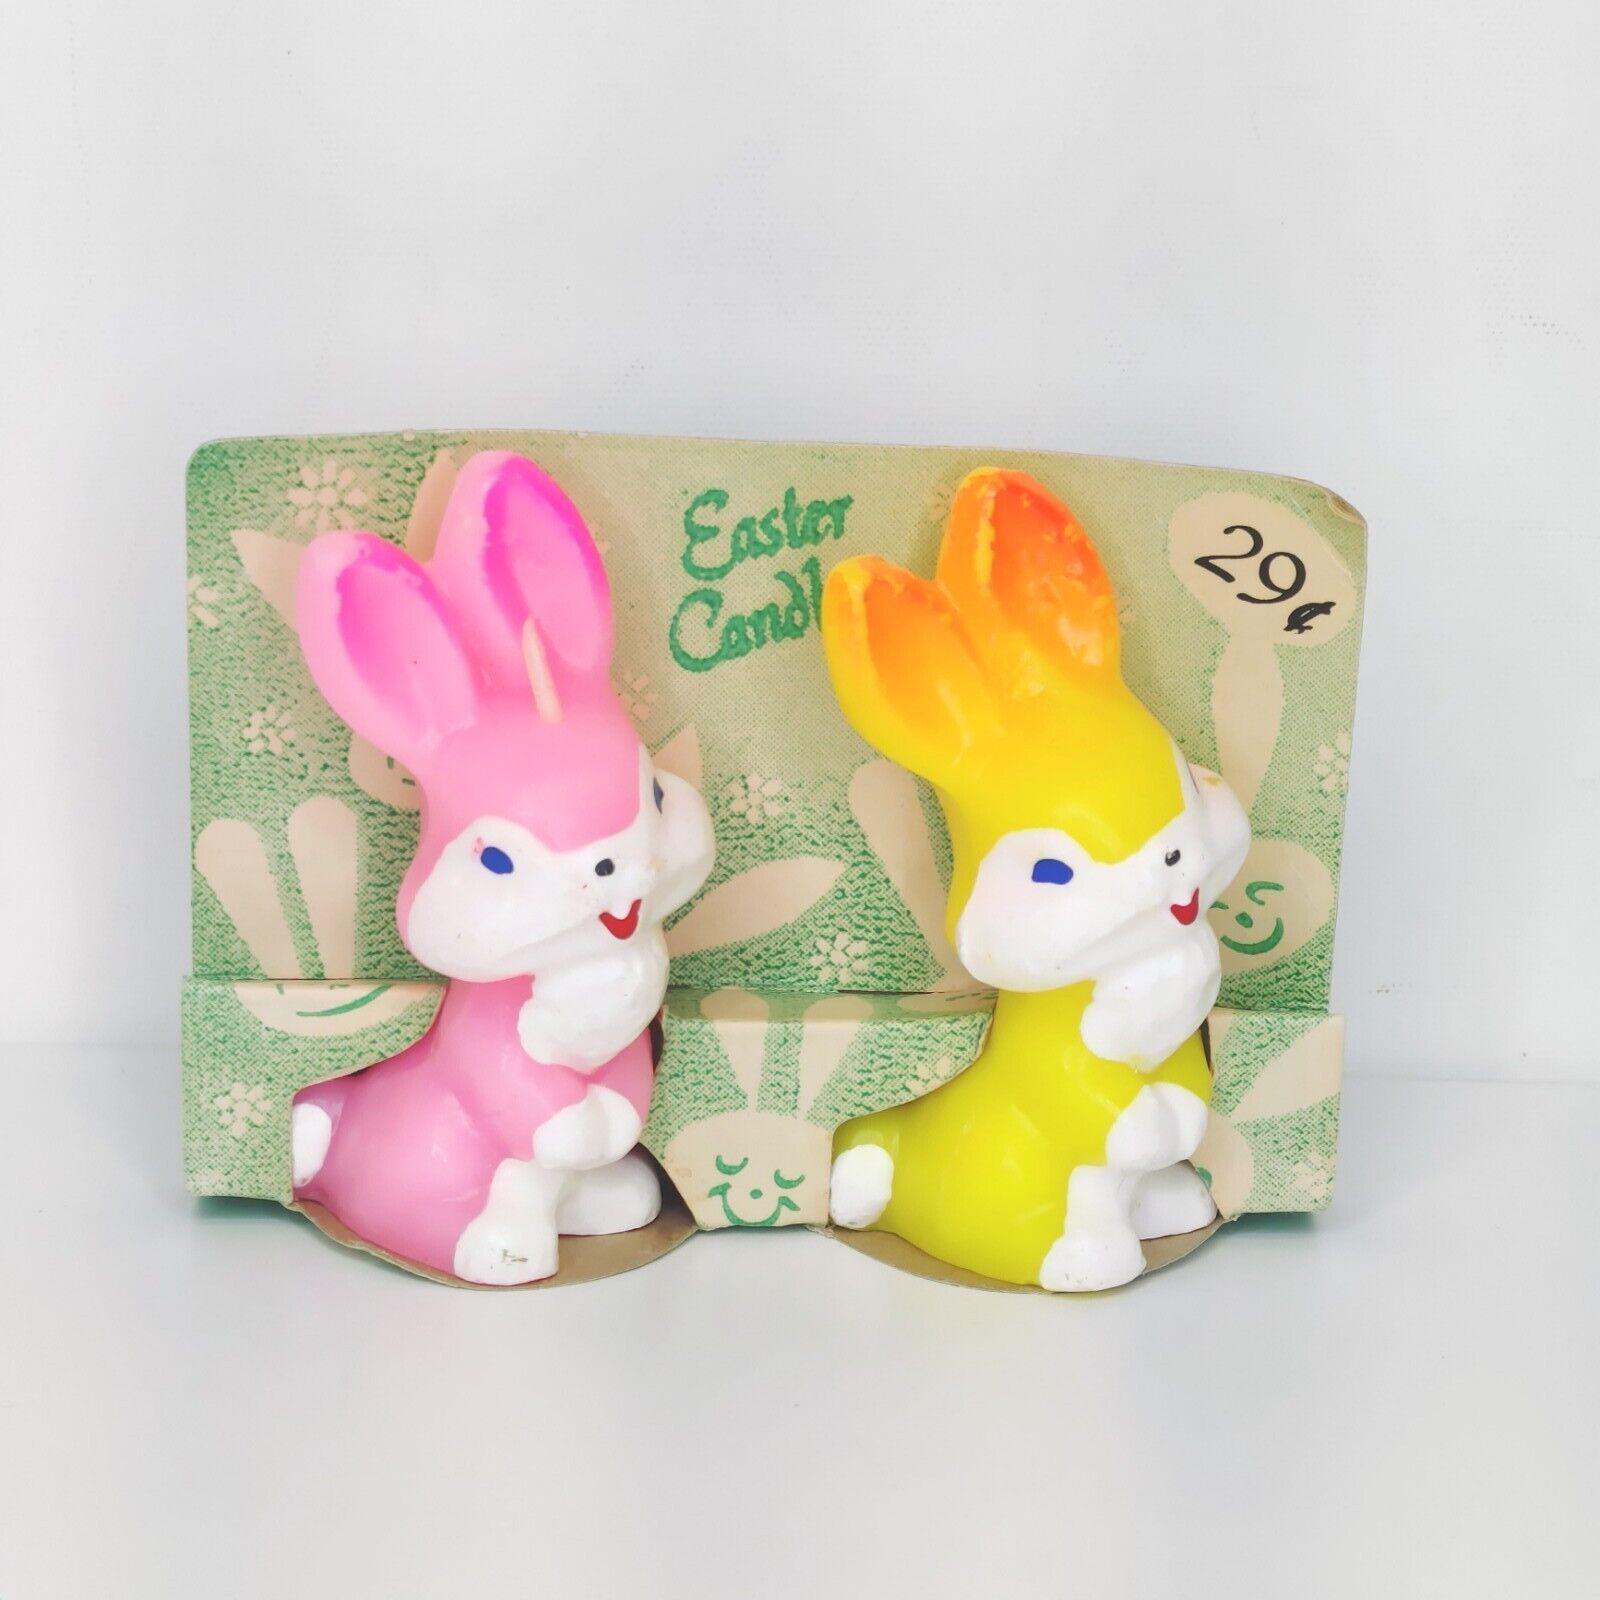 Vintage Gurley Easter Bunny Candles Set Pink Yellow With Original Packaging 3.5